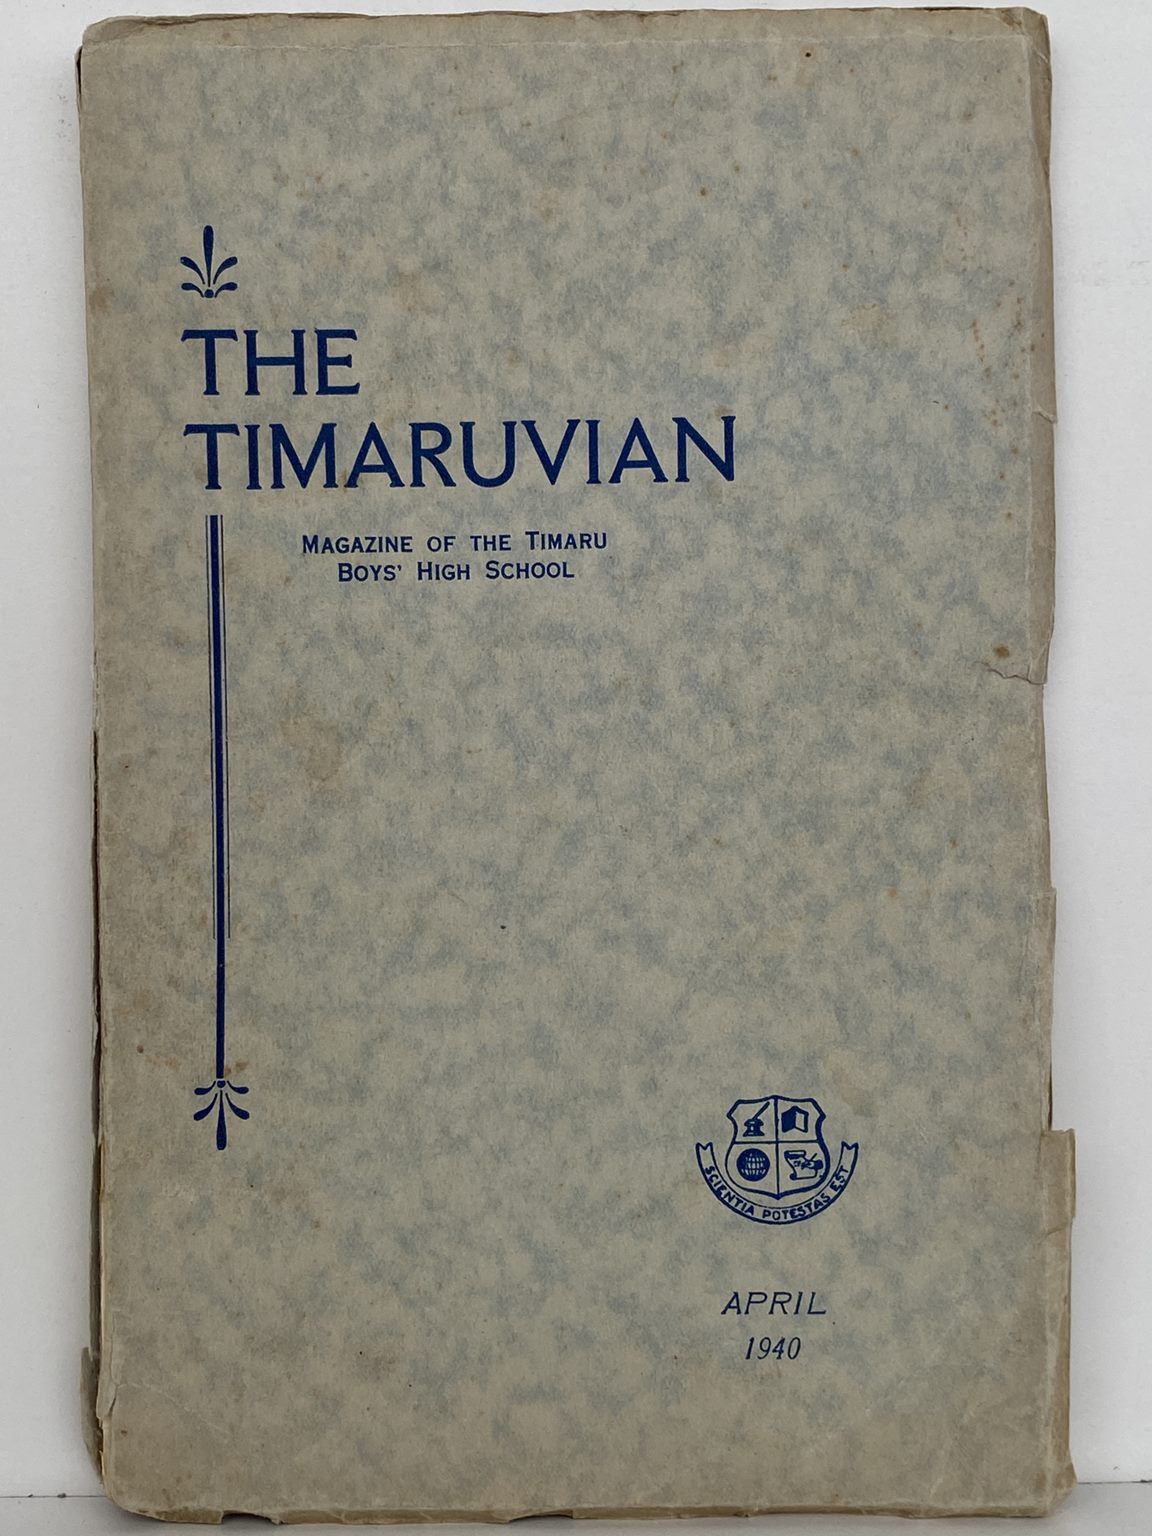 THE TIMARUVIAN: Magazine of the Timaru Boys' High School and its Old Boys' Association 1940